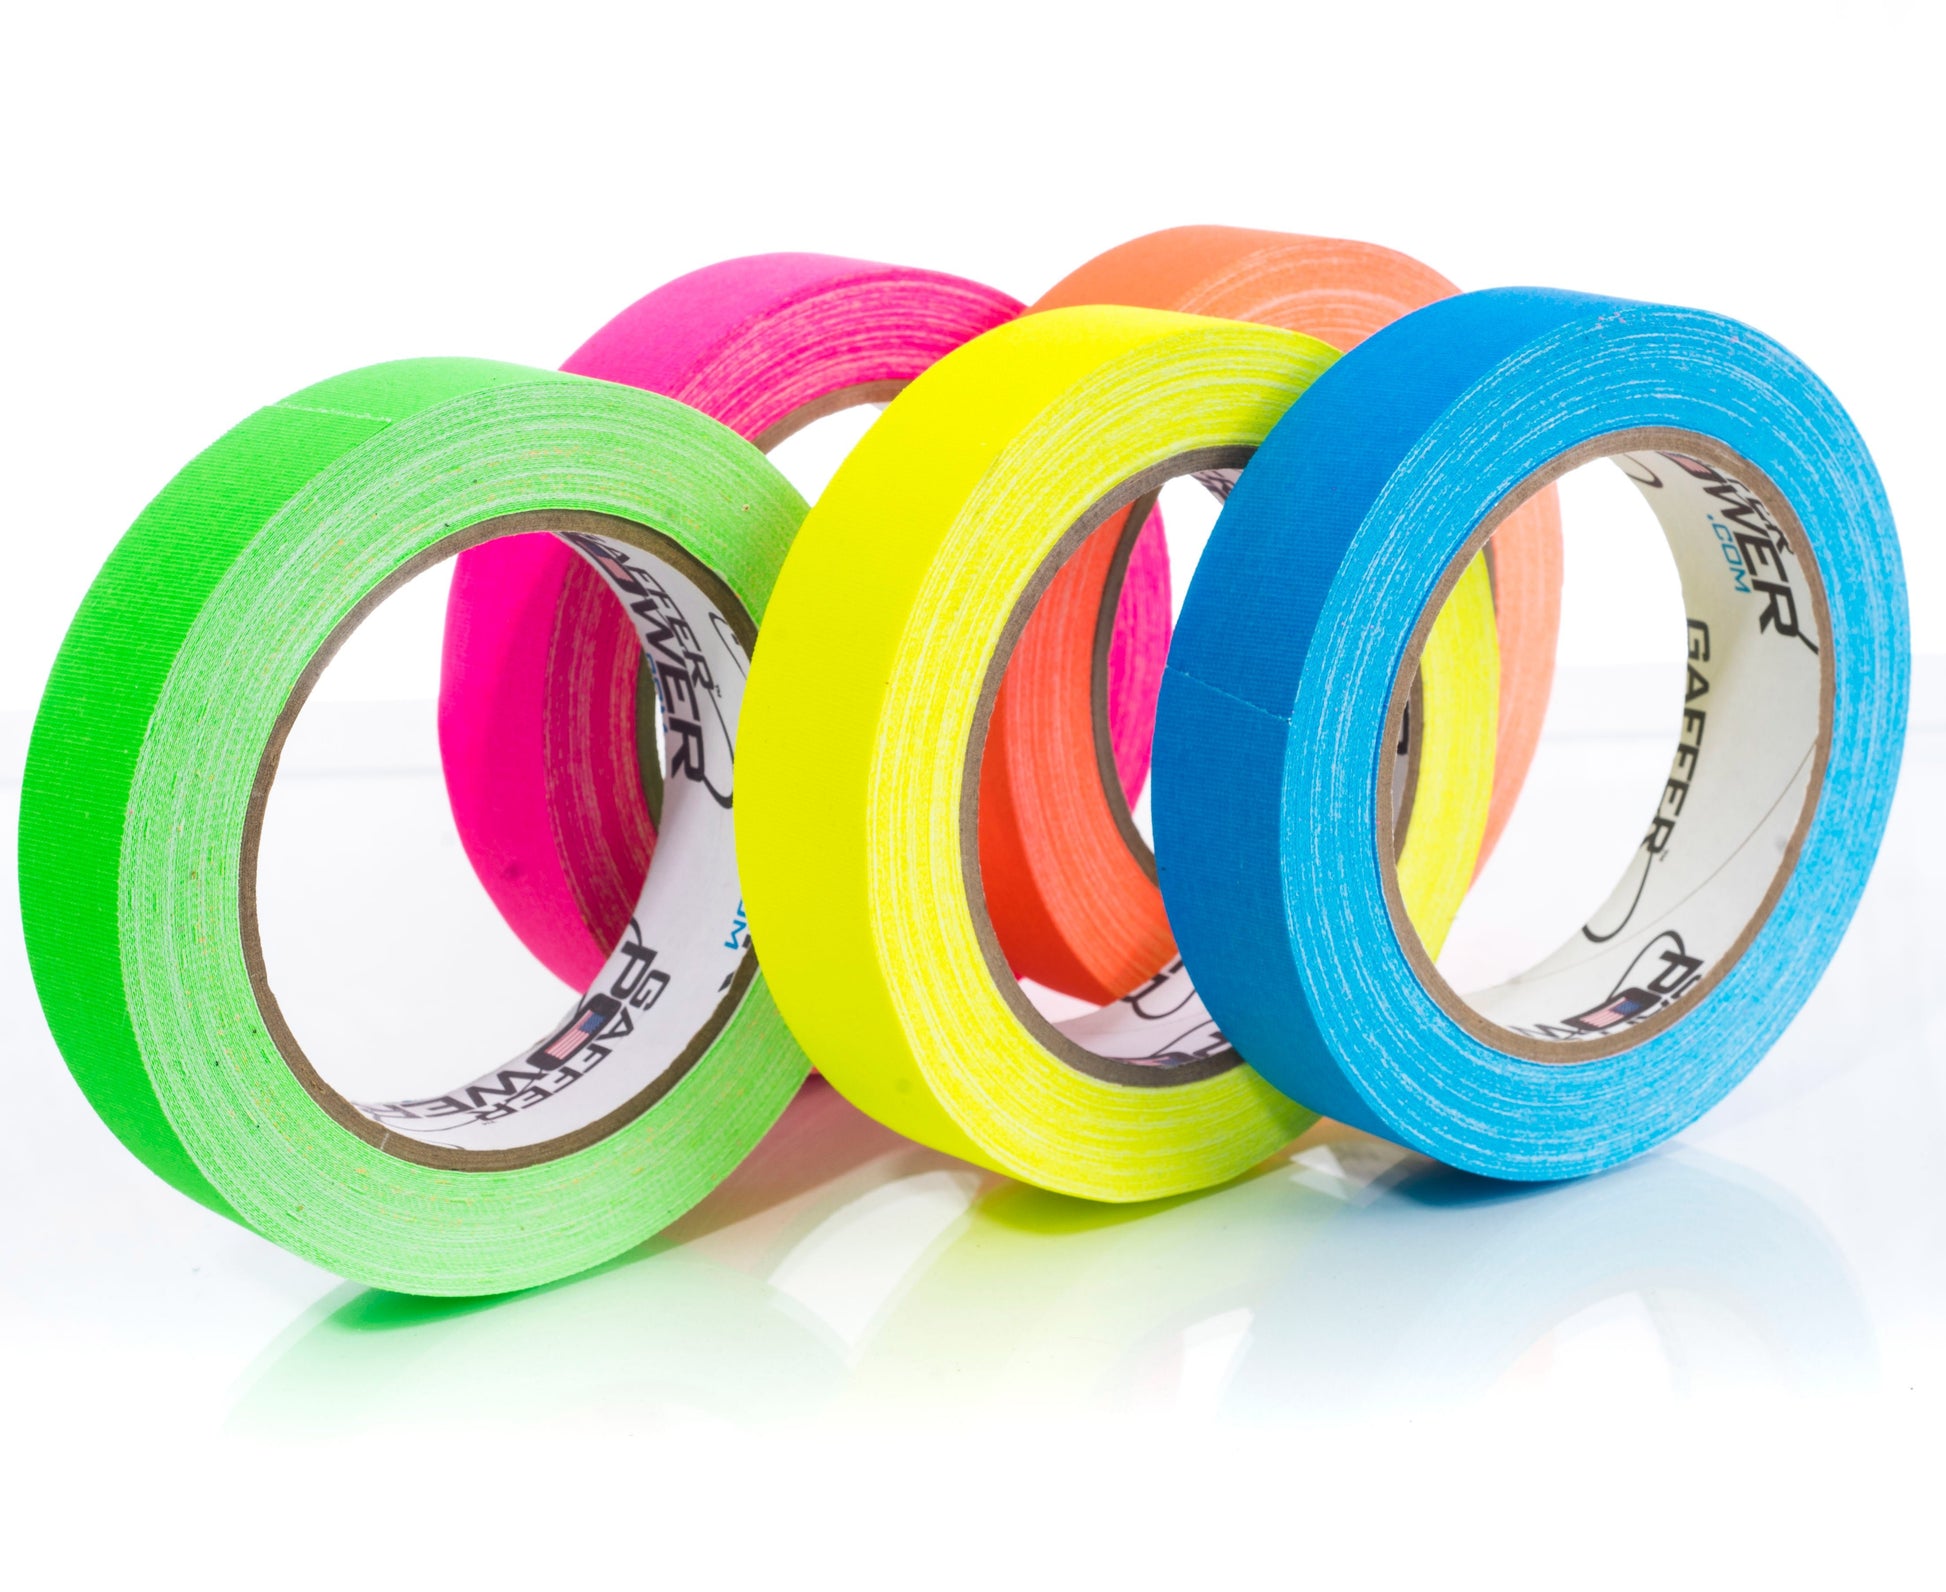 Pro-Tapes - Artist Tape 1/2 Inch Fluorescent Green